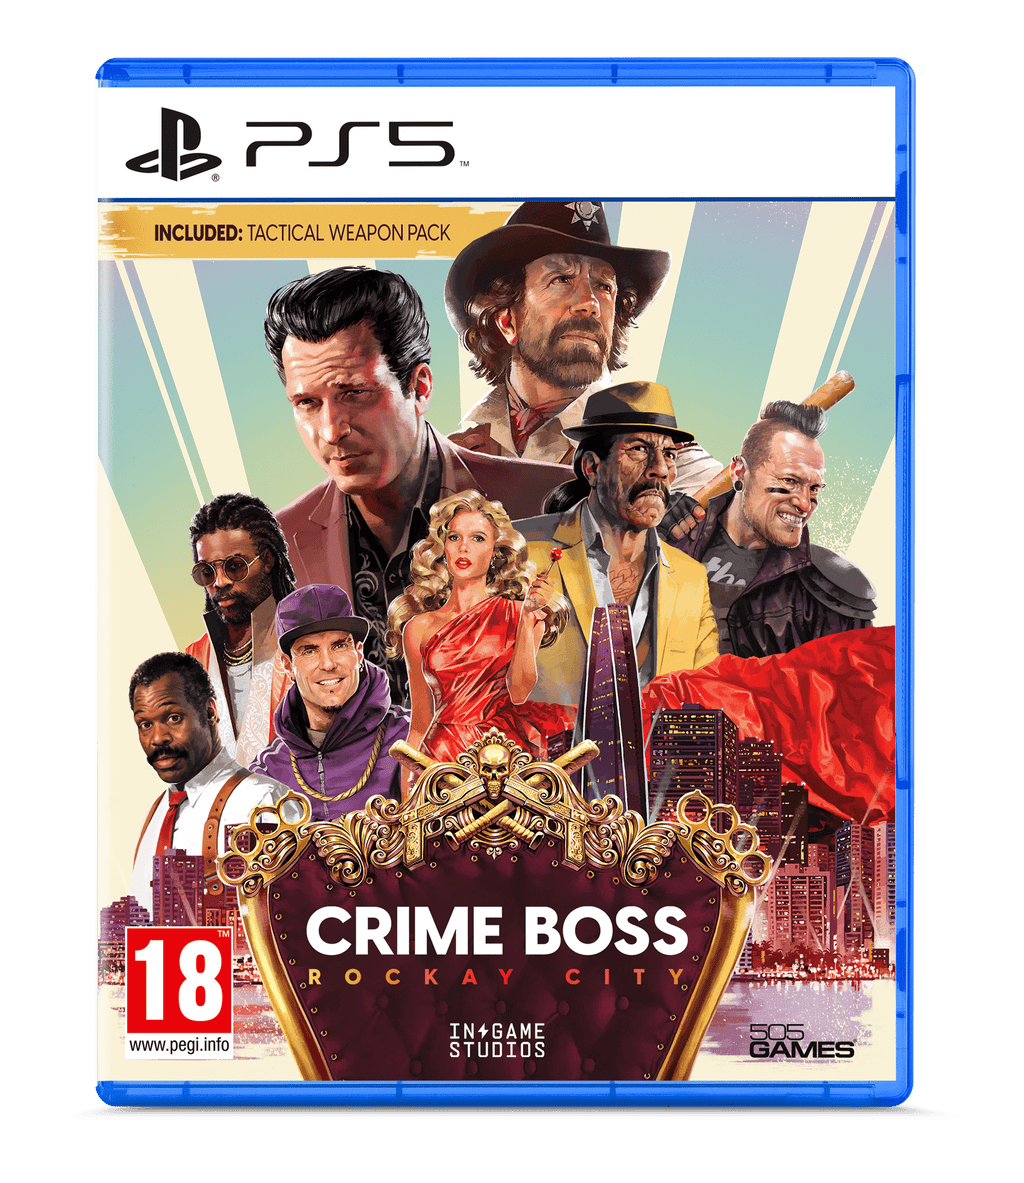 Crime Boss: Rockay City Patch Notes (Epic Games Store) - Crime